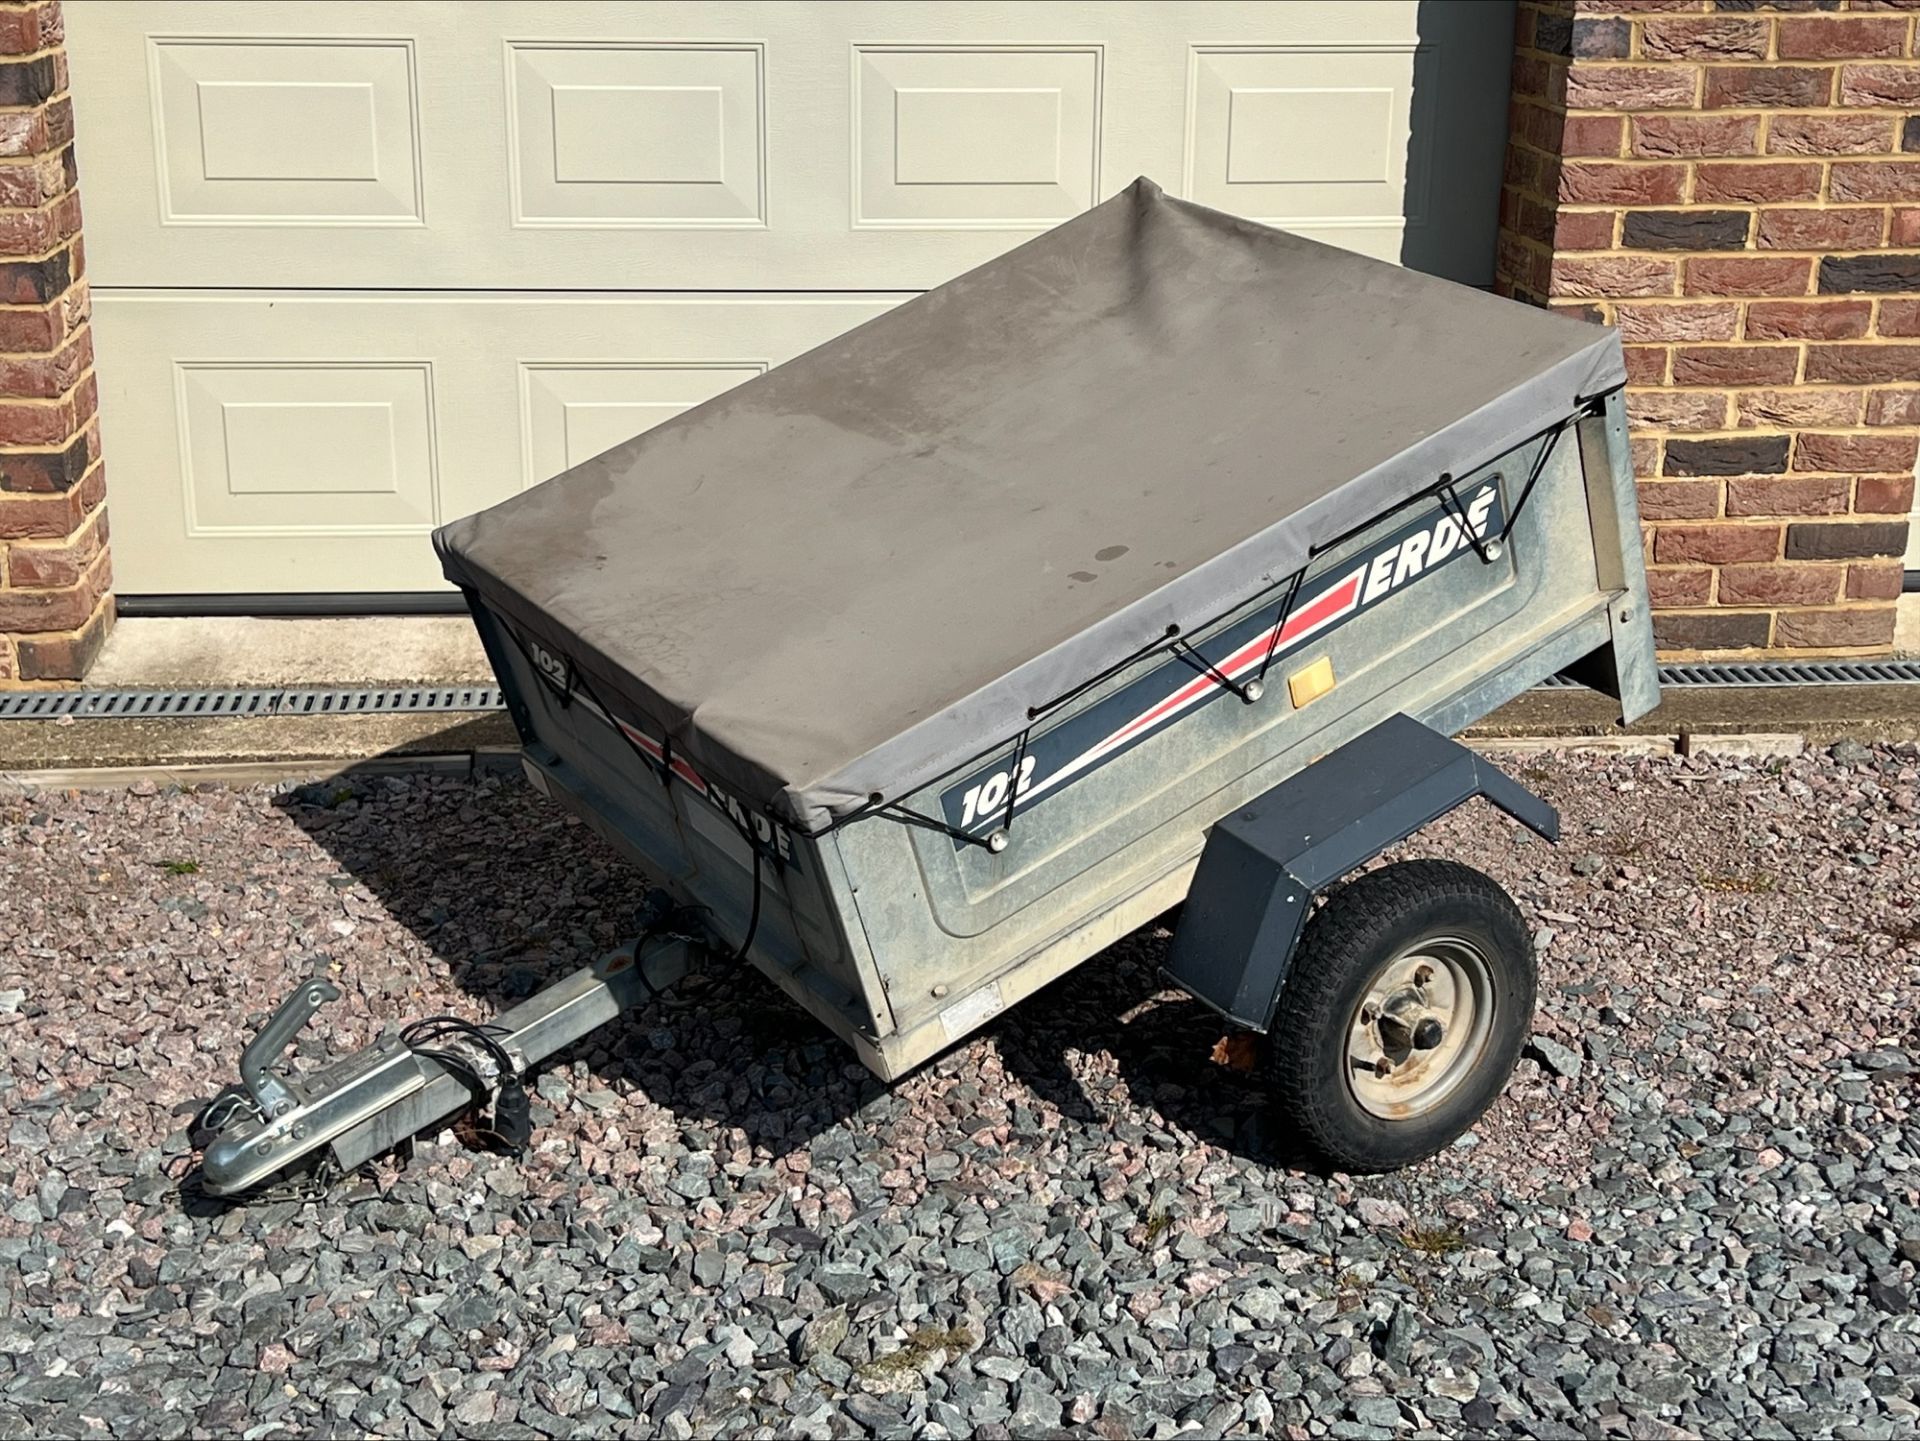 Single axle utility trailer with sides and cover